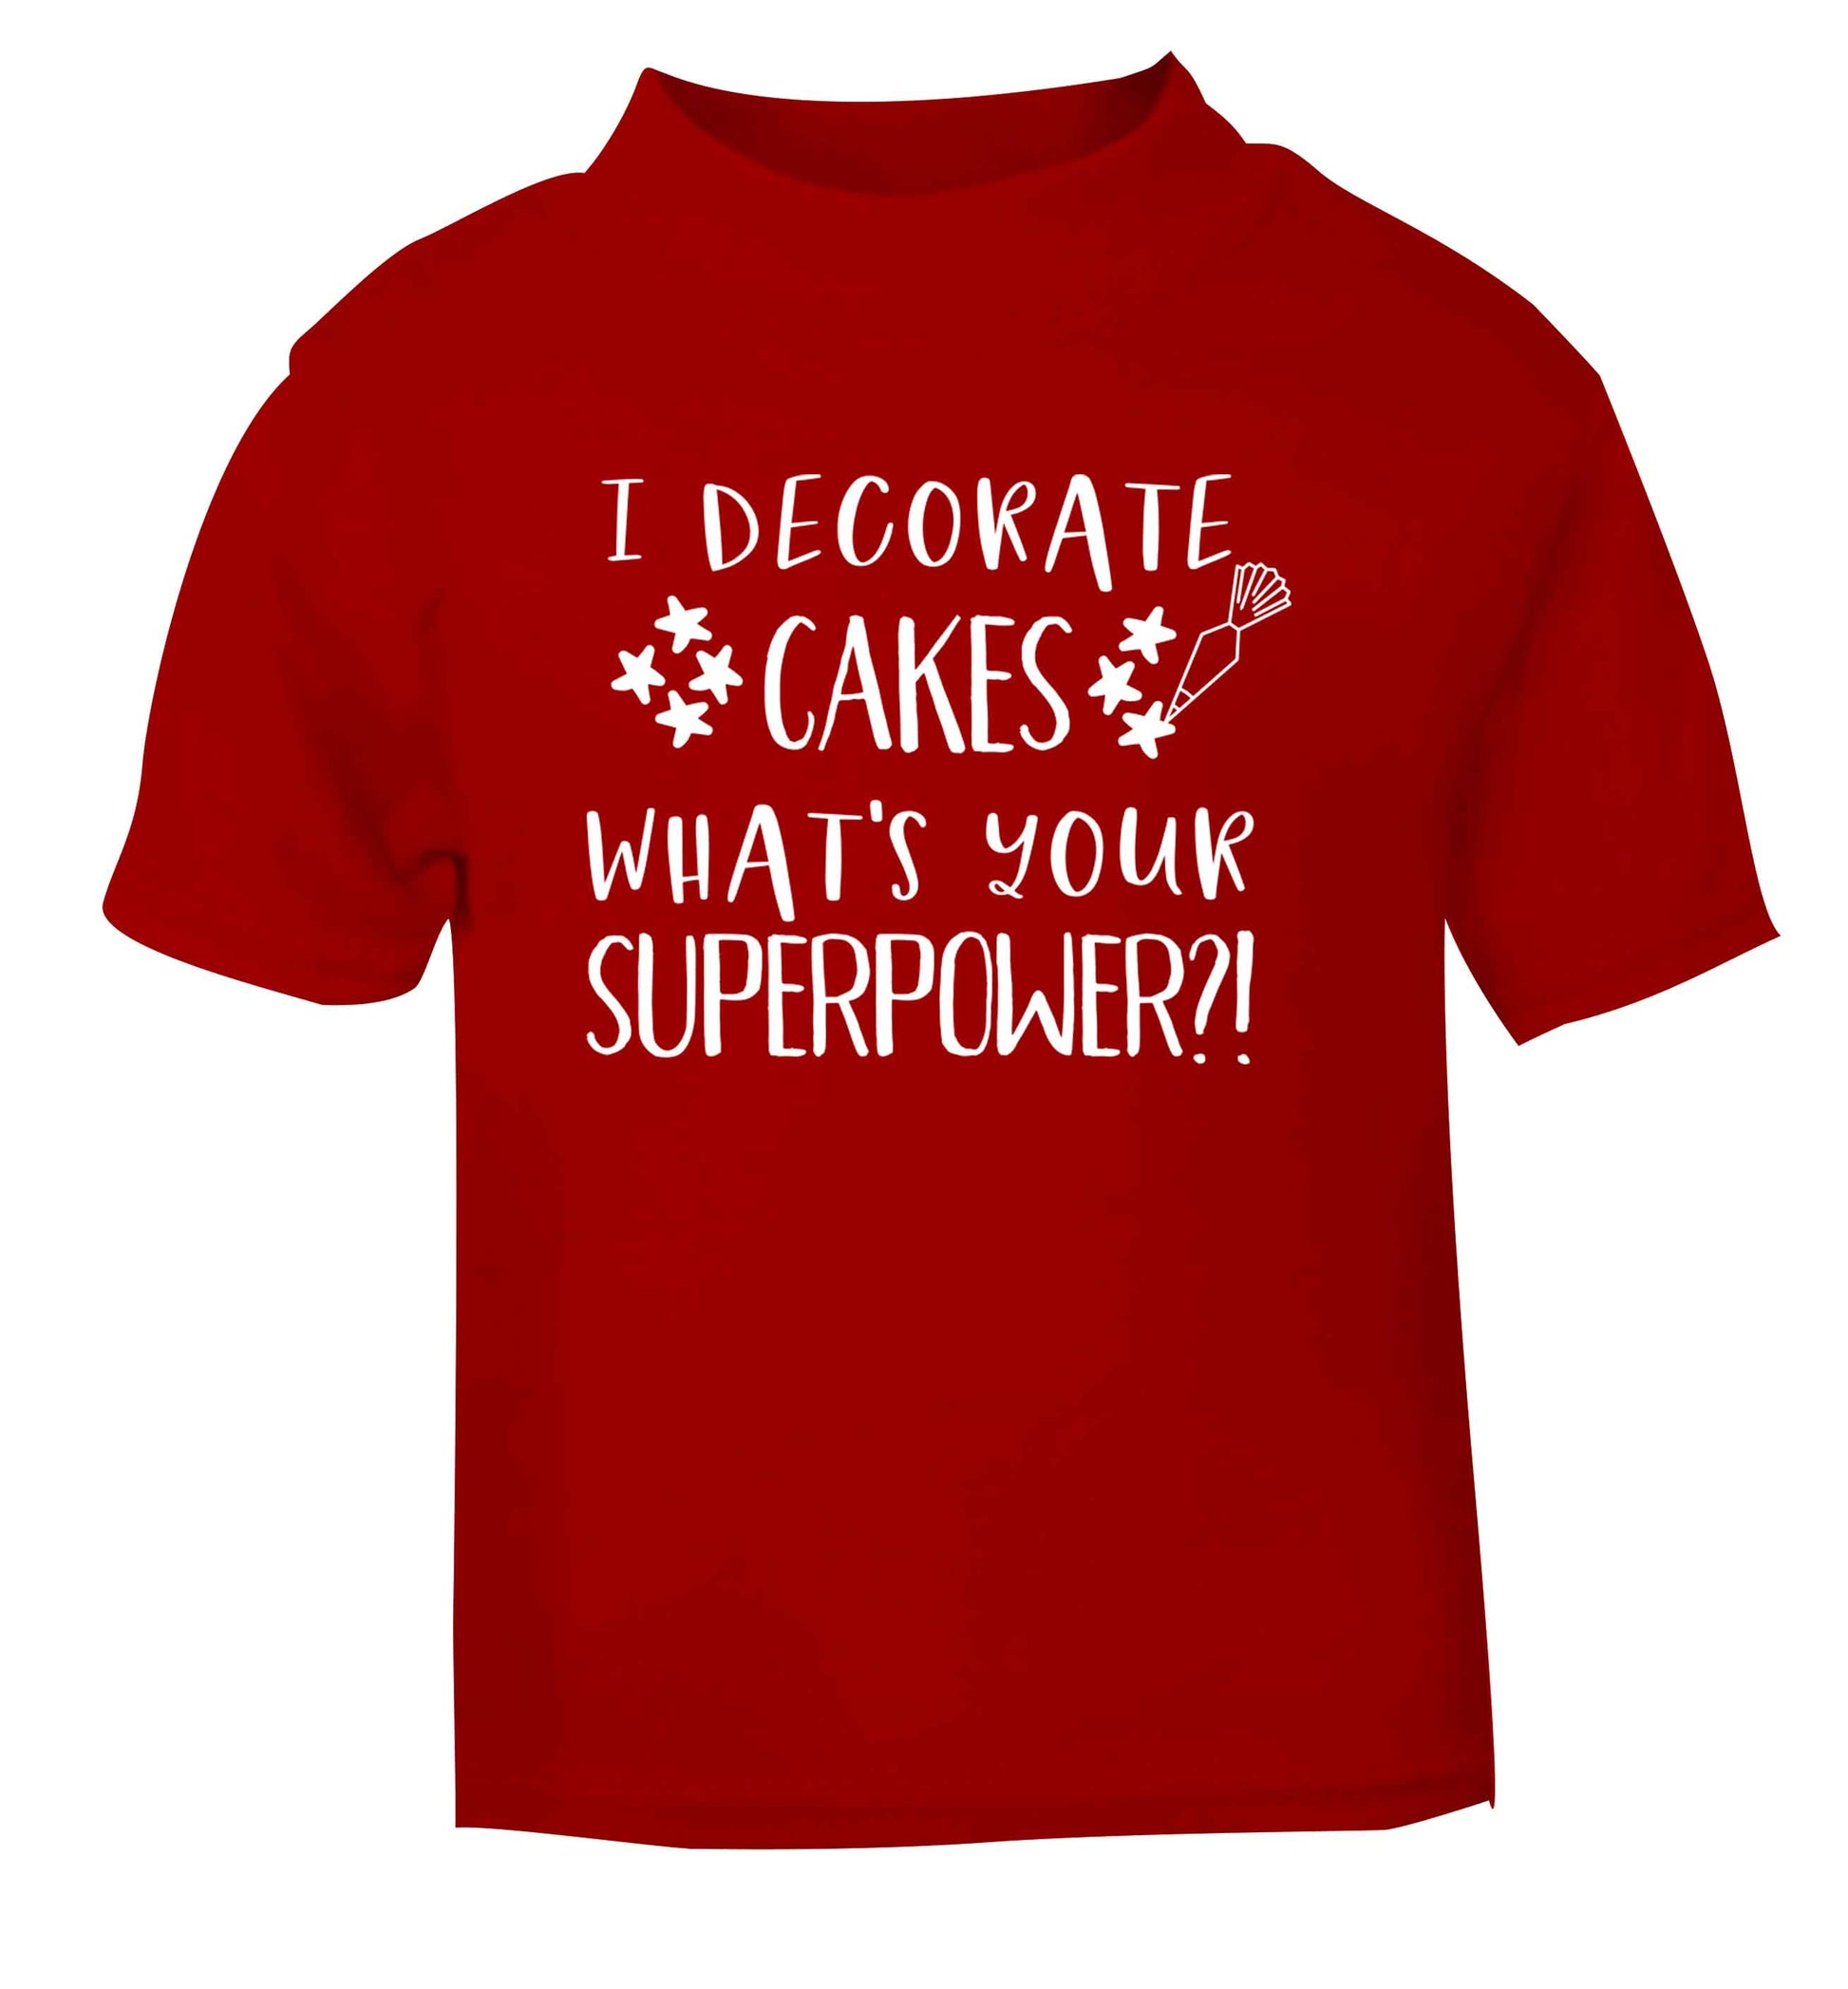 I decorate cakes what's your superpower?! red Baby Toddler Tshirt 2 Years